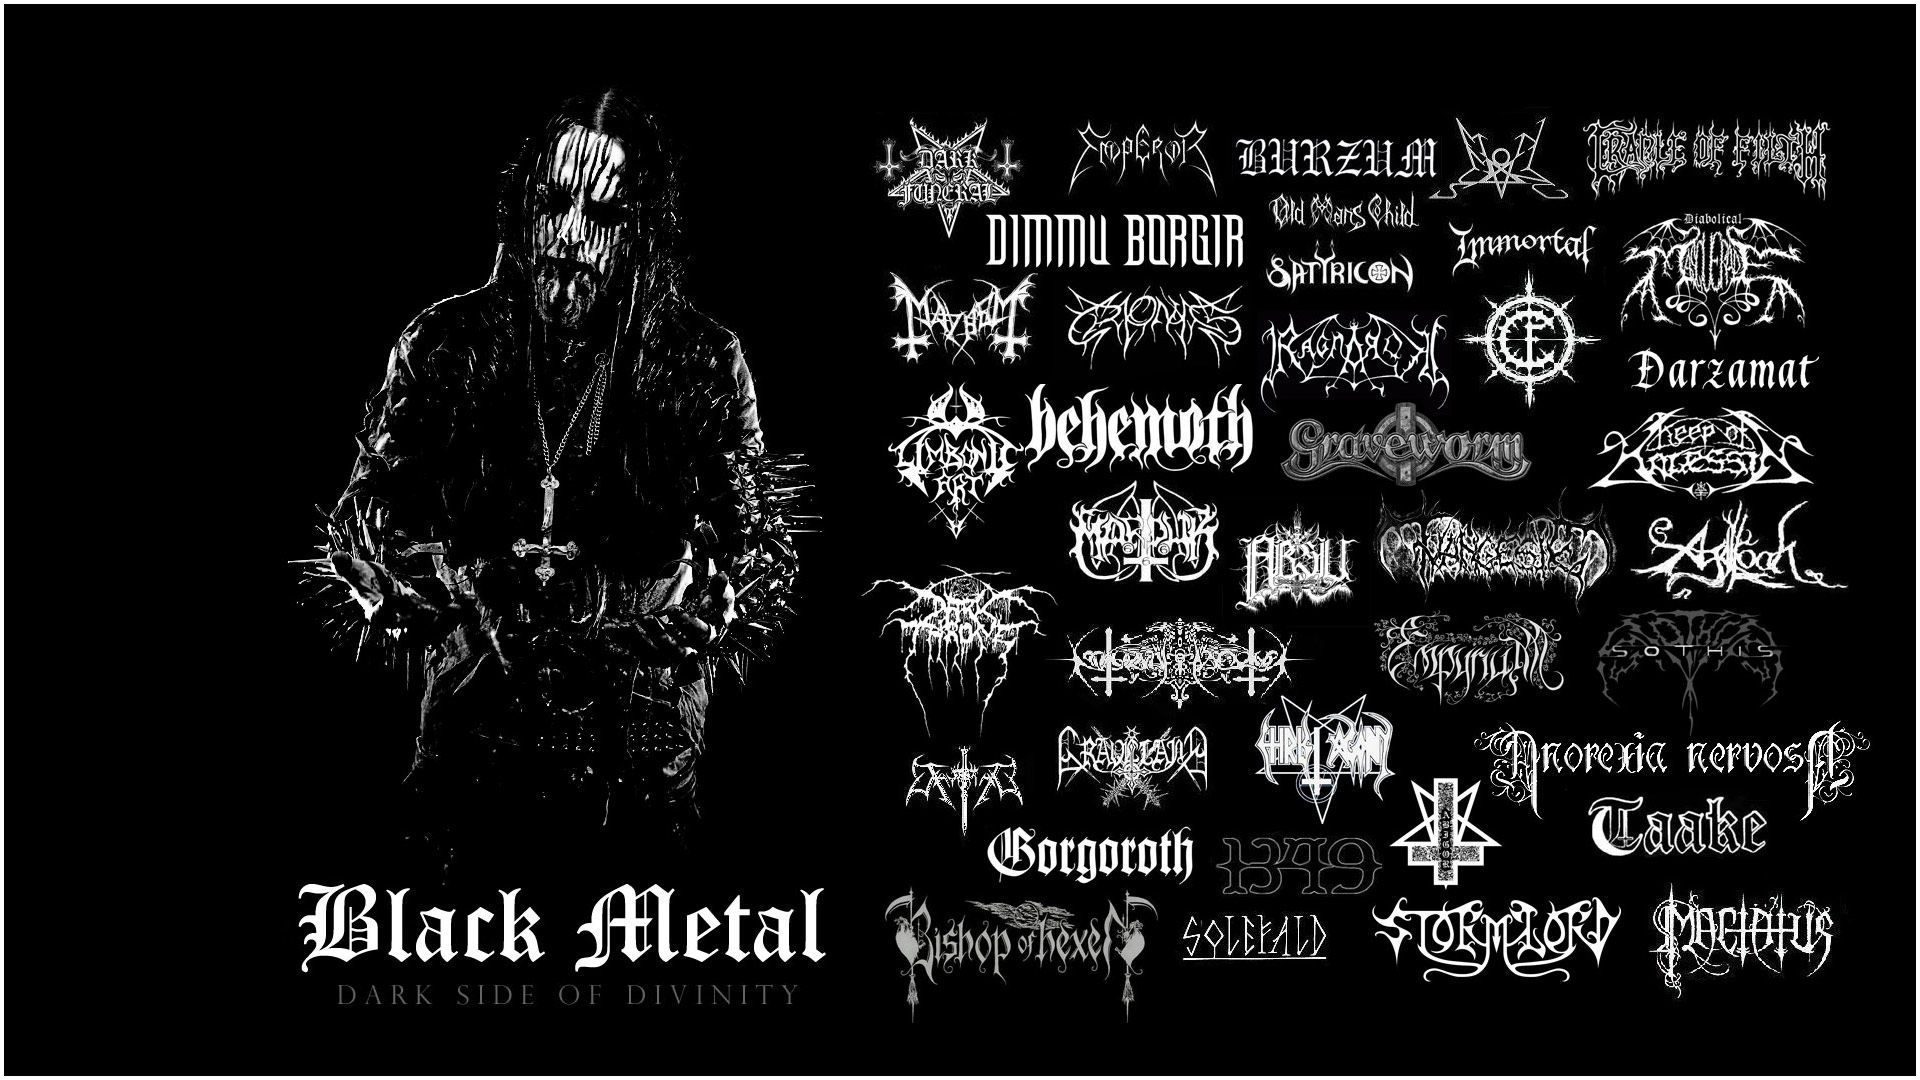 Gallery for - band black metal wallpaper